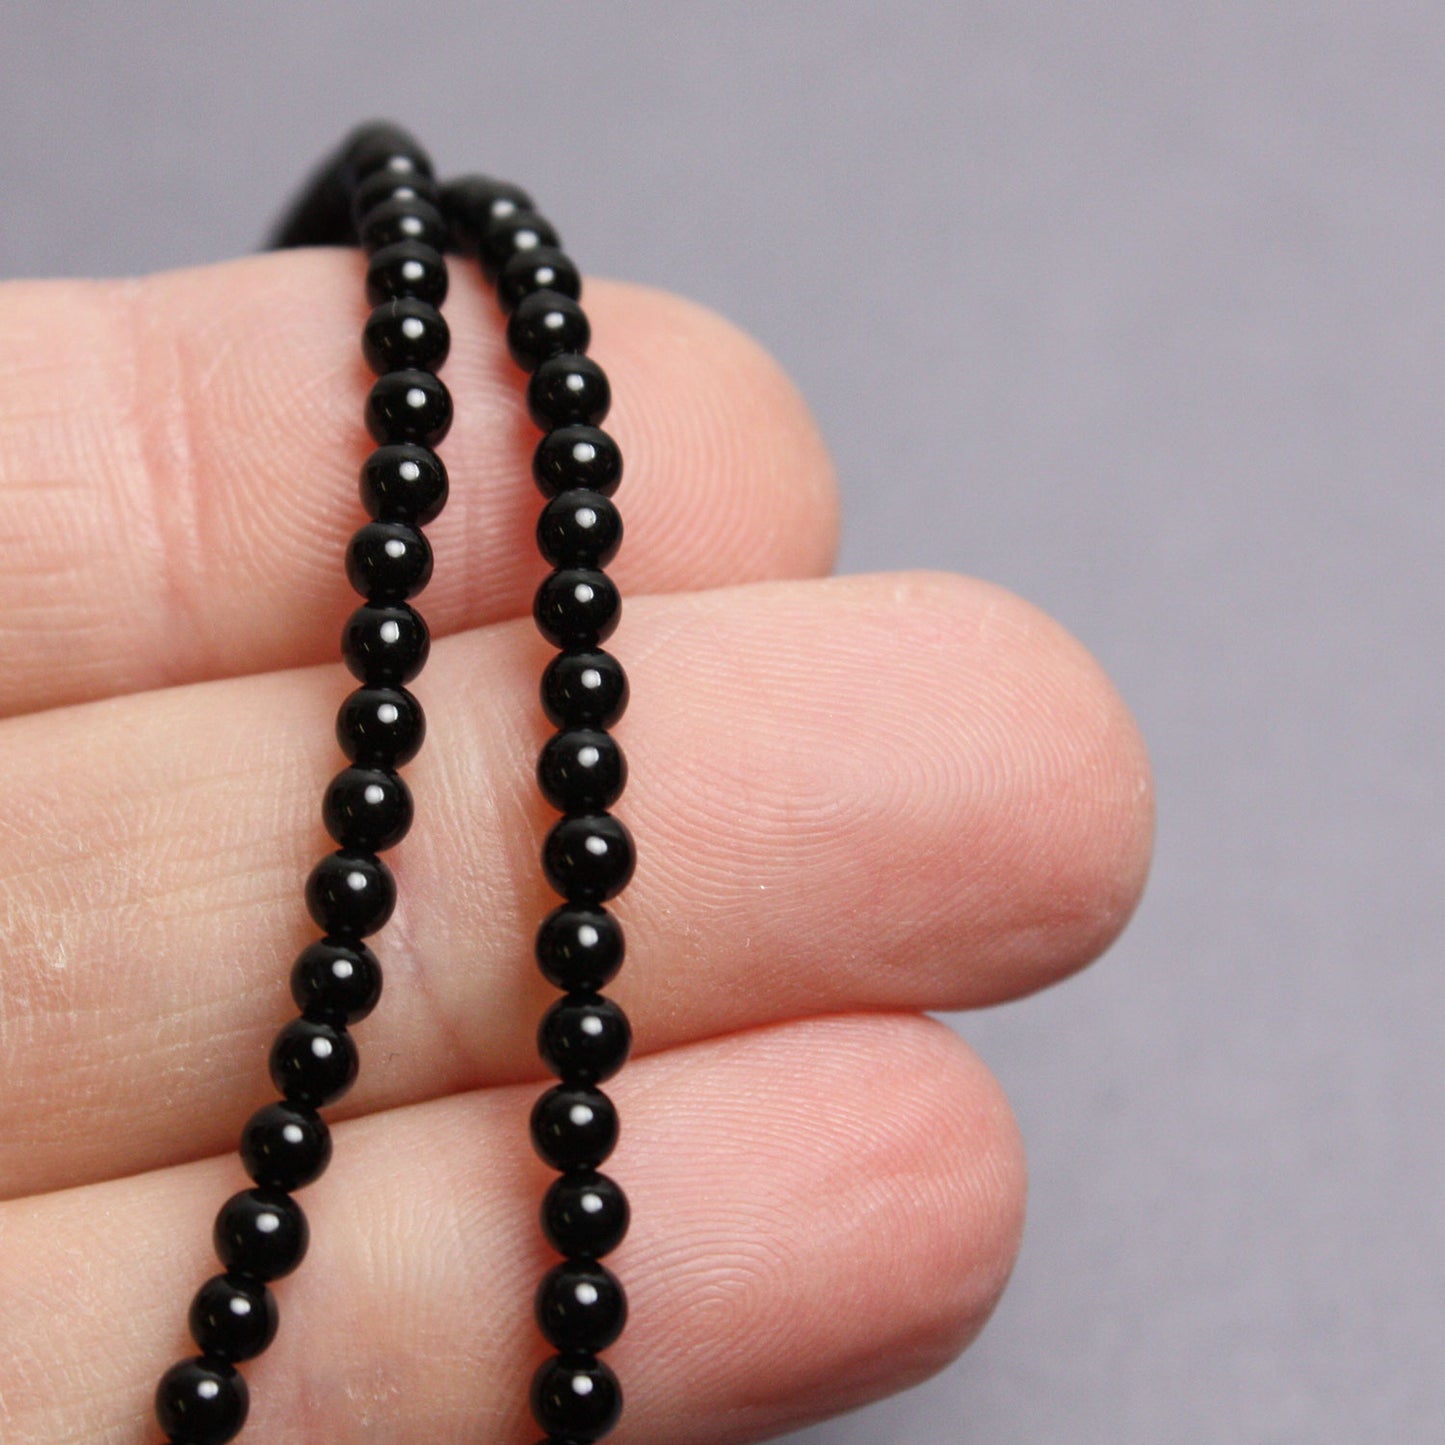 Black Onyx Necklace with Sterling Silver Clasp